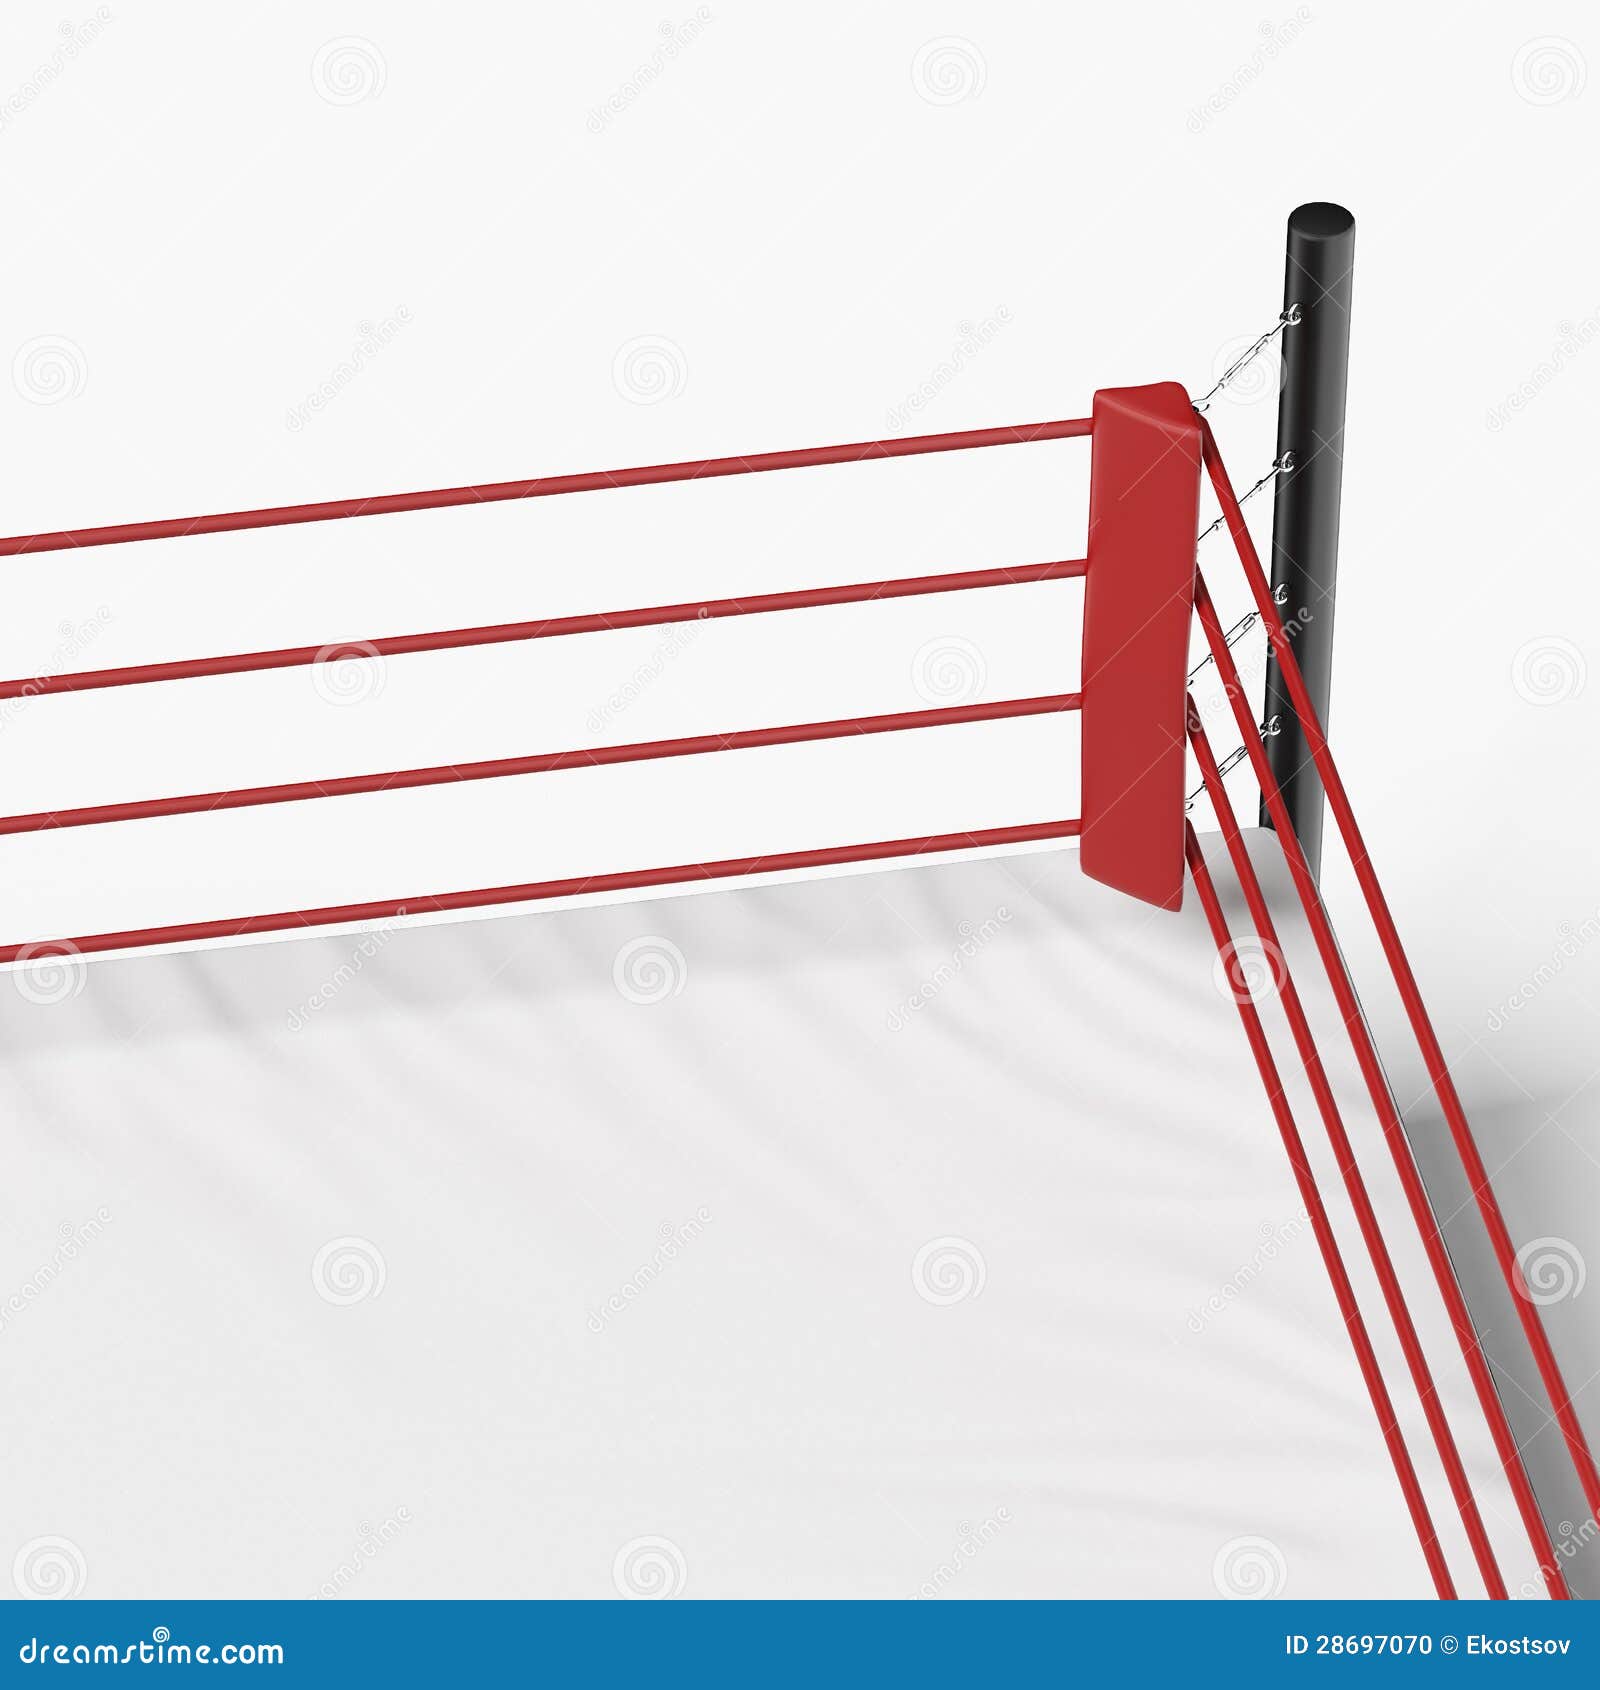 clipart boxing ring - photo #14